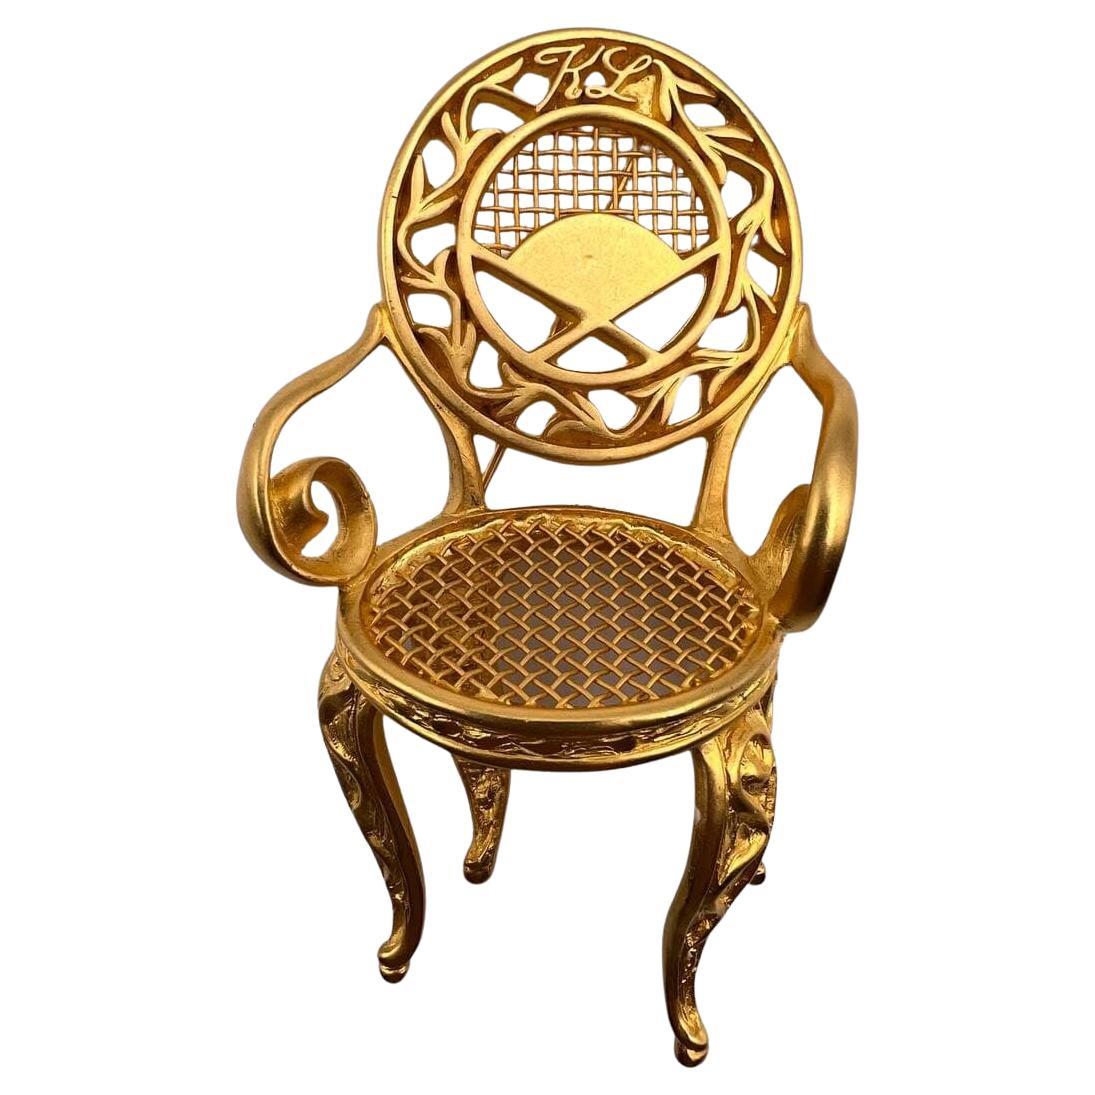 Karl Lagerfeld Rococo Louis XV 24k Gold Chair Brooch, 1980s For Sale